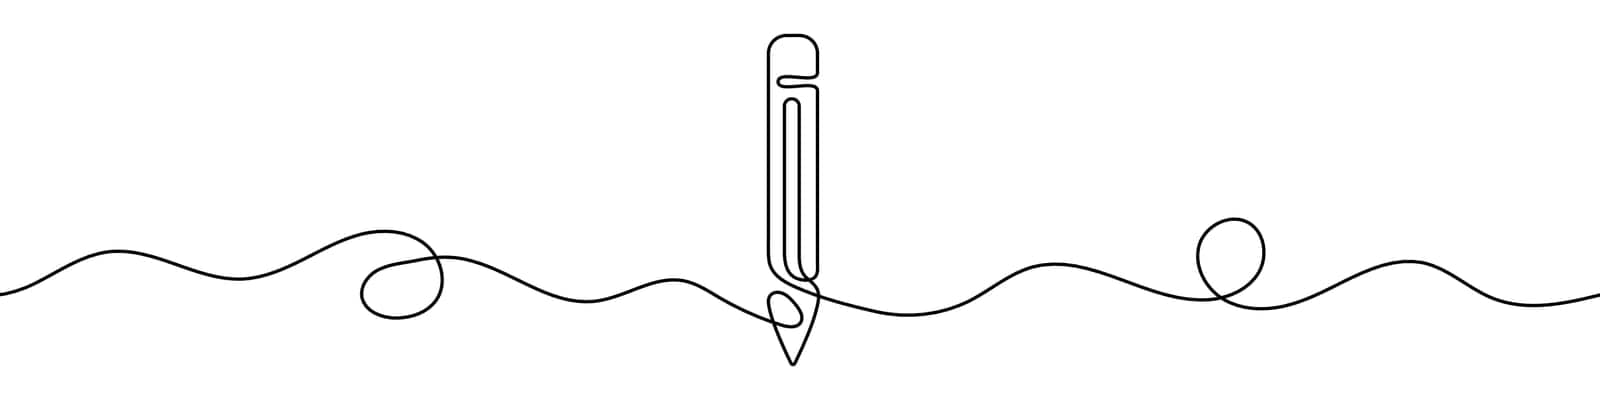 Continuous editable drawing of pencil. One line drawing pencil icon by Chekman